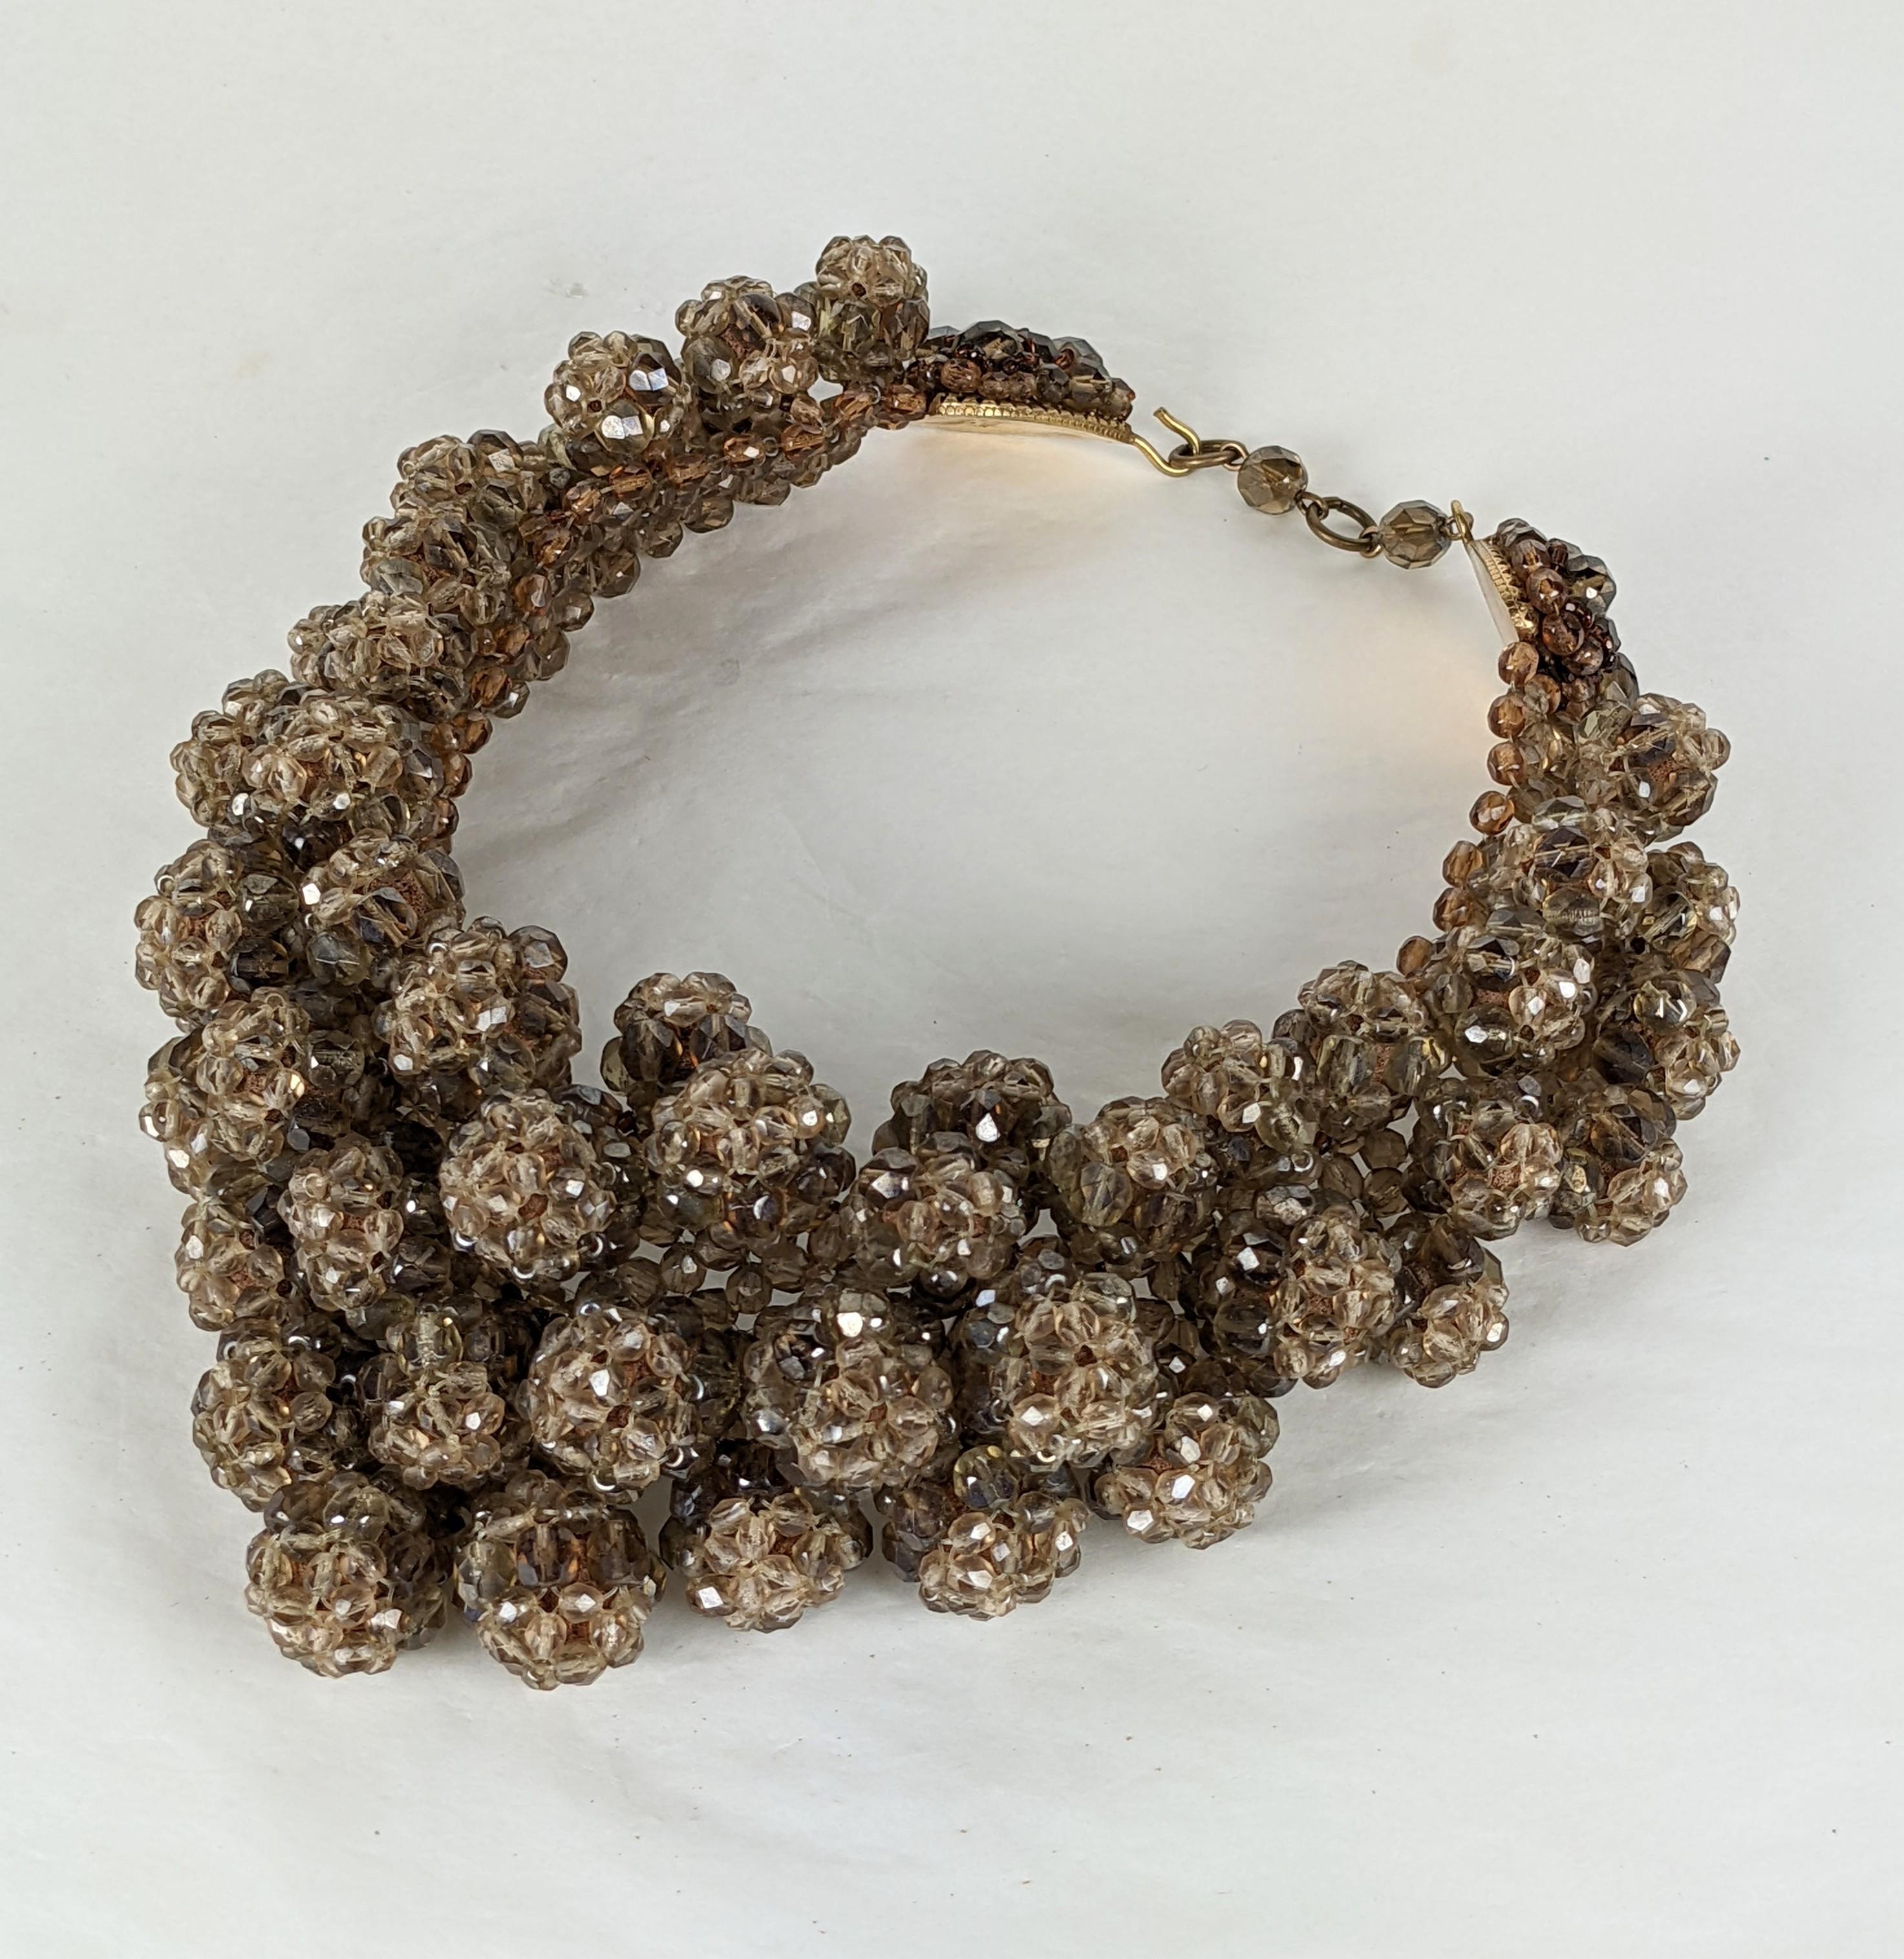 Elaborate and striking Coppola et Toppo Beaded Berry Bib from the 1960's Italy. Intricately beaded berry motifs are attached to a beaded collar of the same beads in smokey faceted resin. Elaborately beaded back plate closure with signature.  1960's